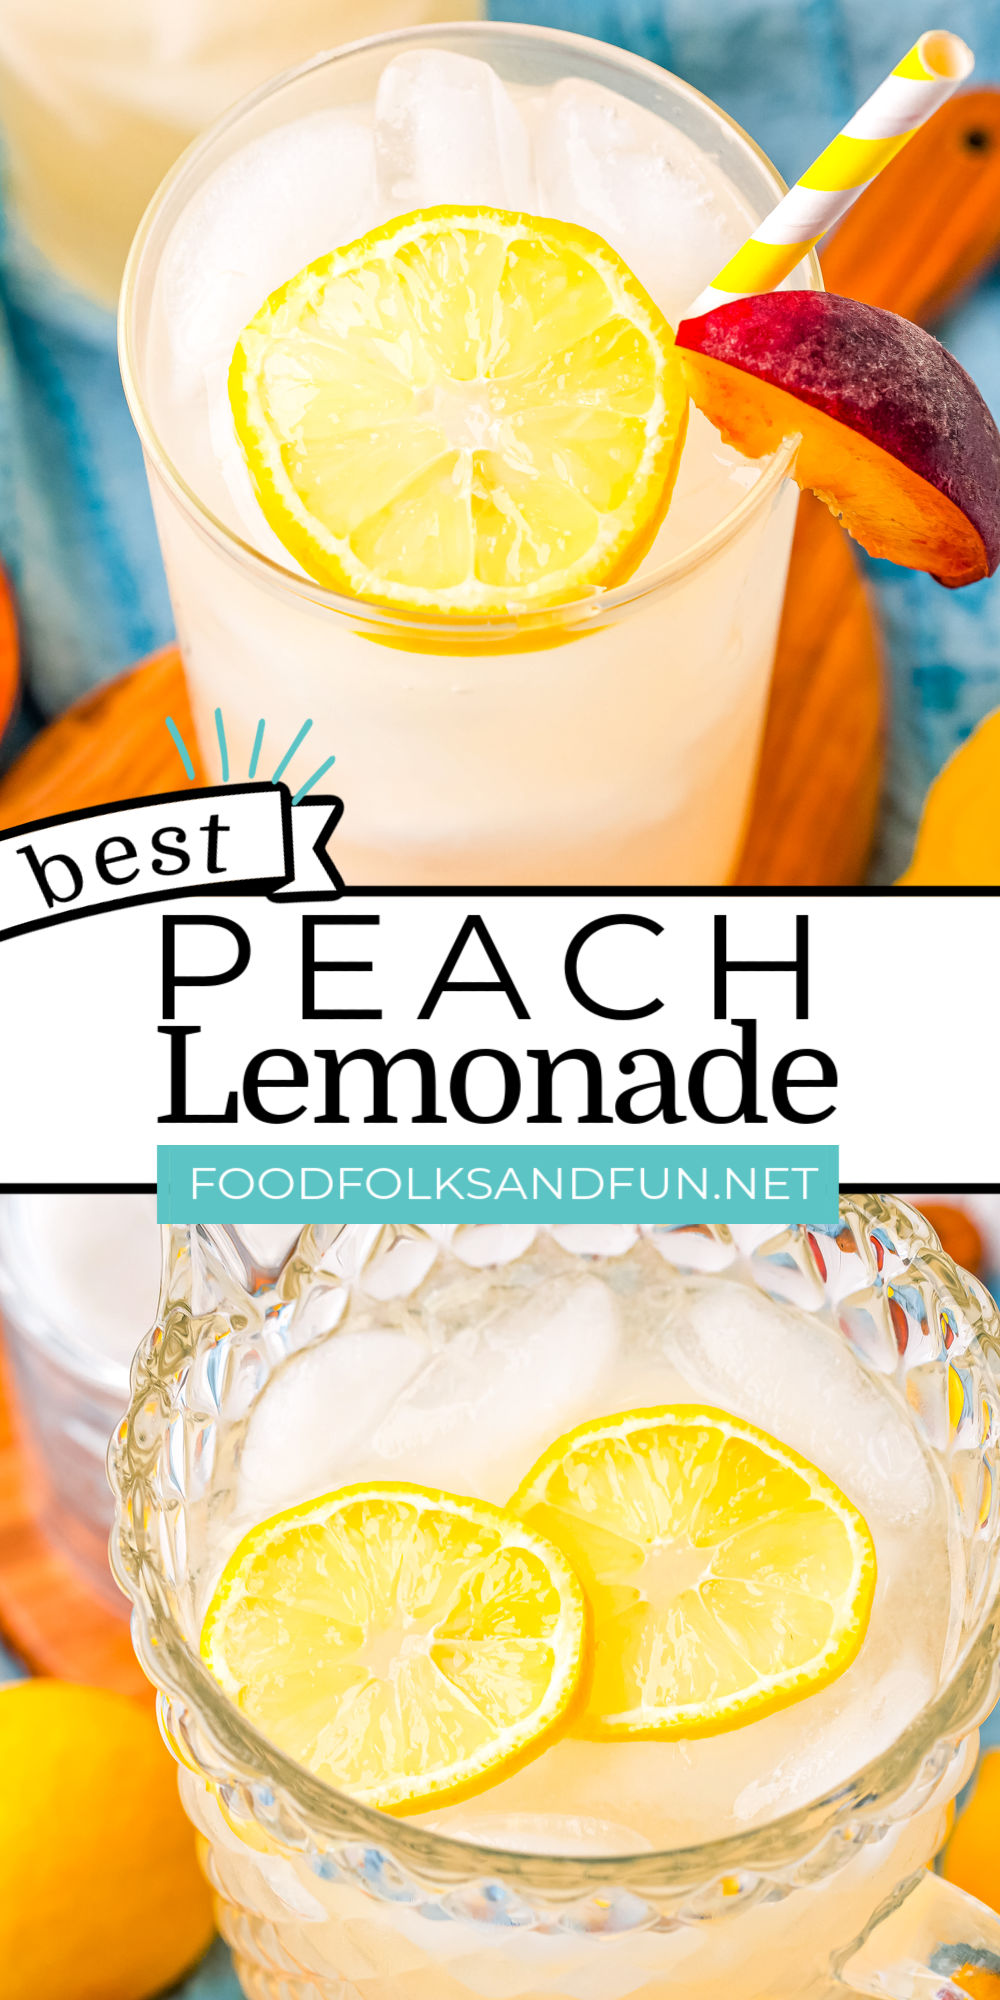 This Fresh Peach Lemonade recipe is a cool and refreshing way to use in-season peaches. This is an easy recipe to enjoy during peach season or any time of the year when you use frozen peaches!  via @foodfolksandfun